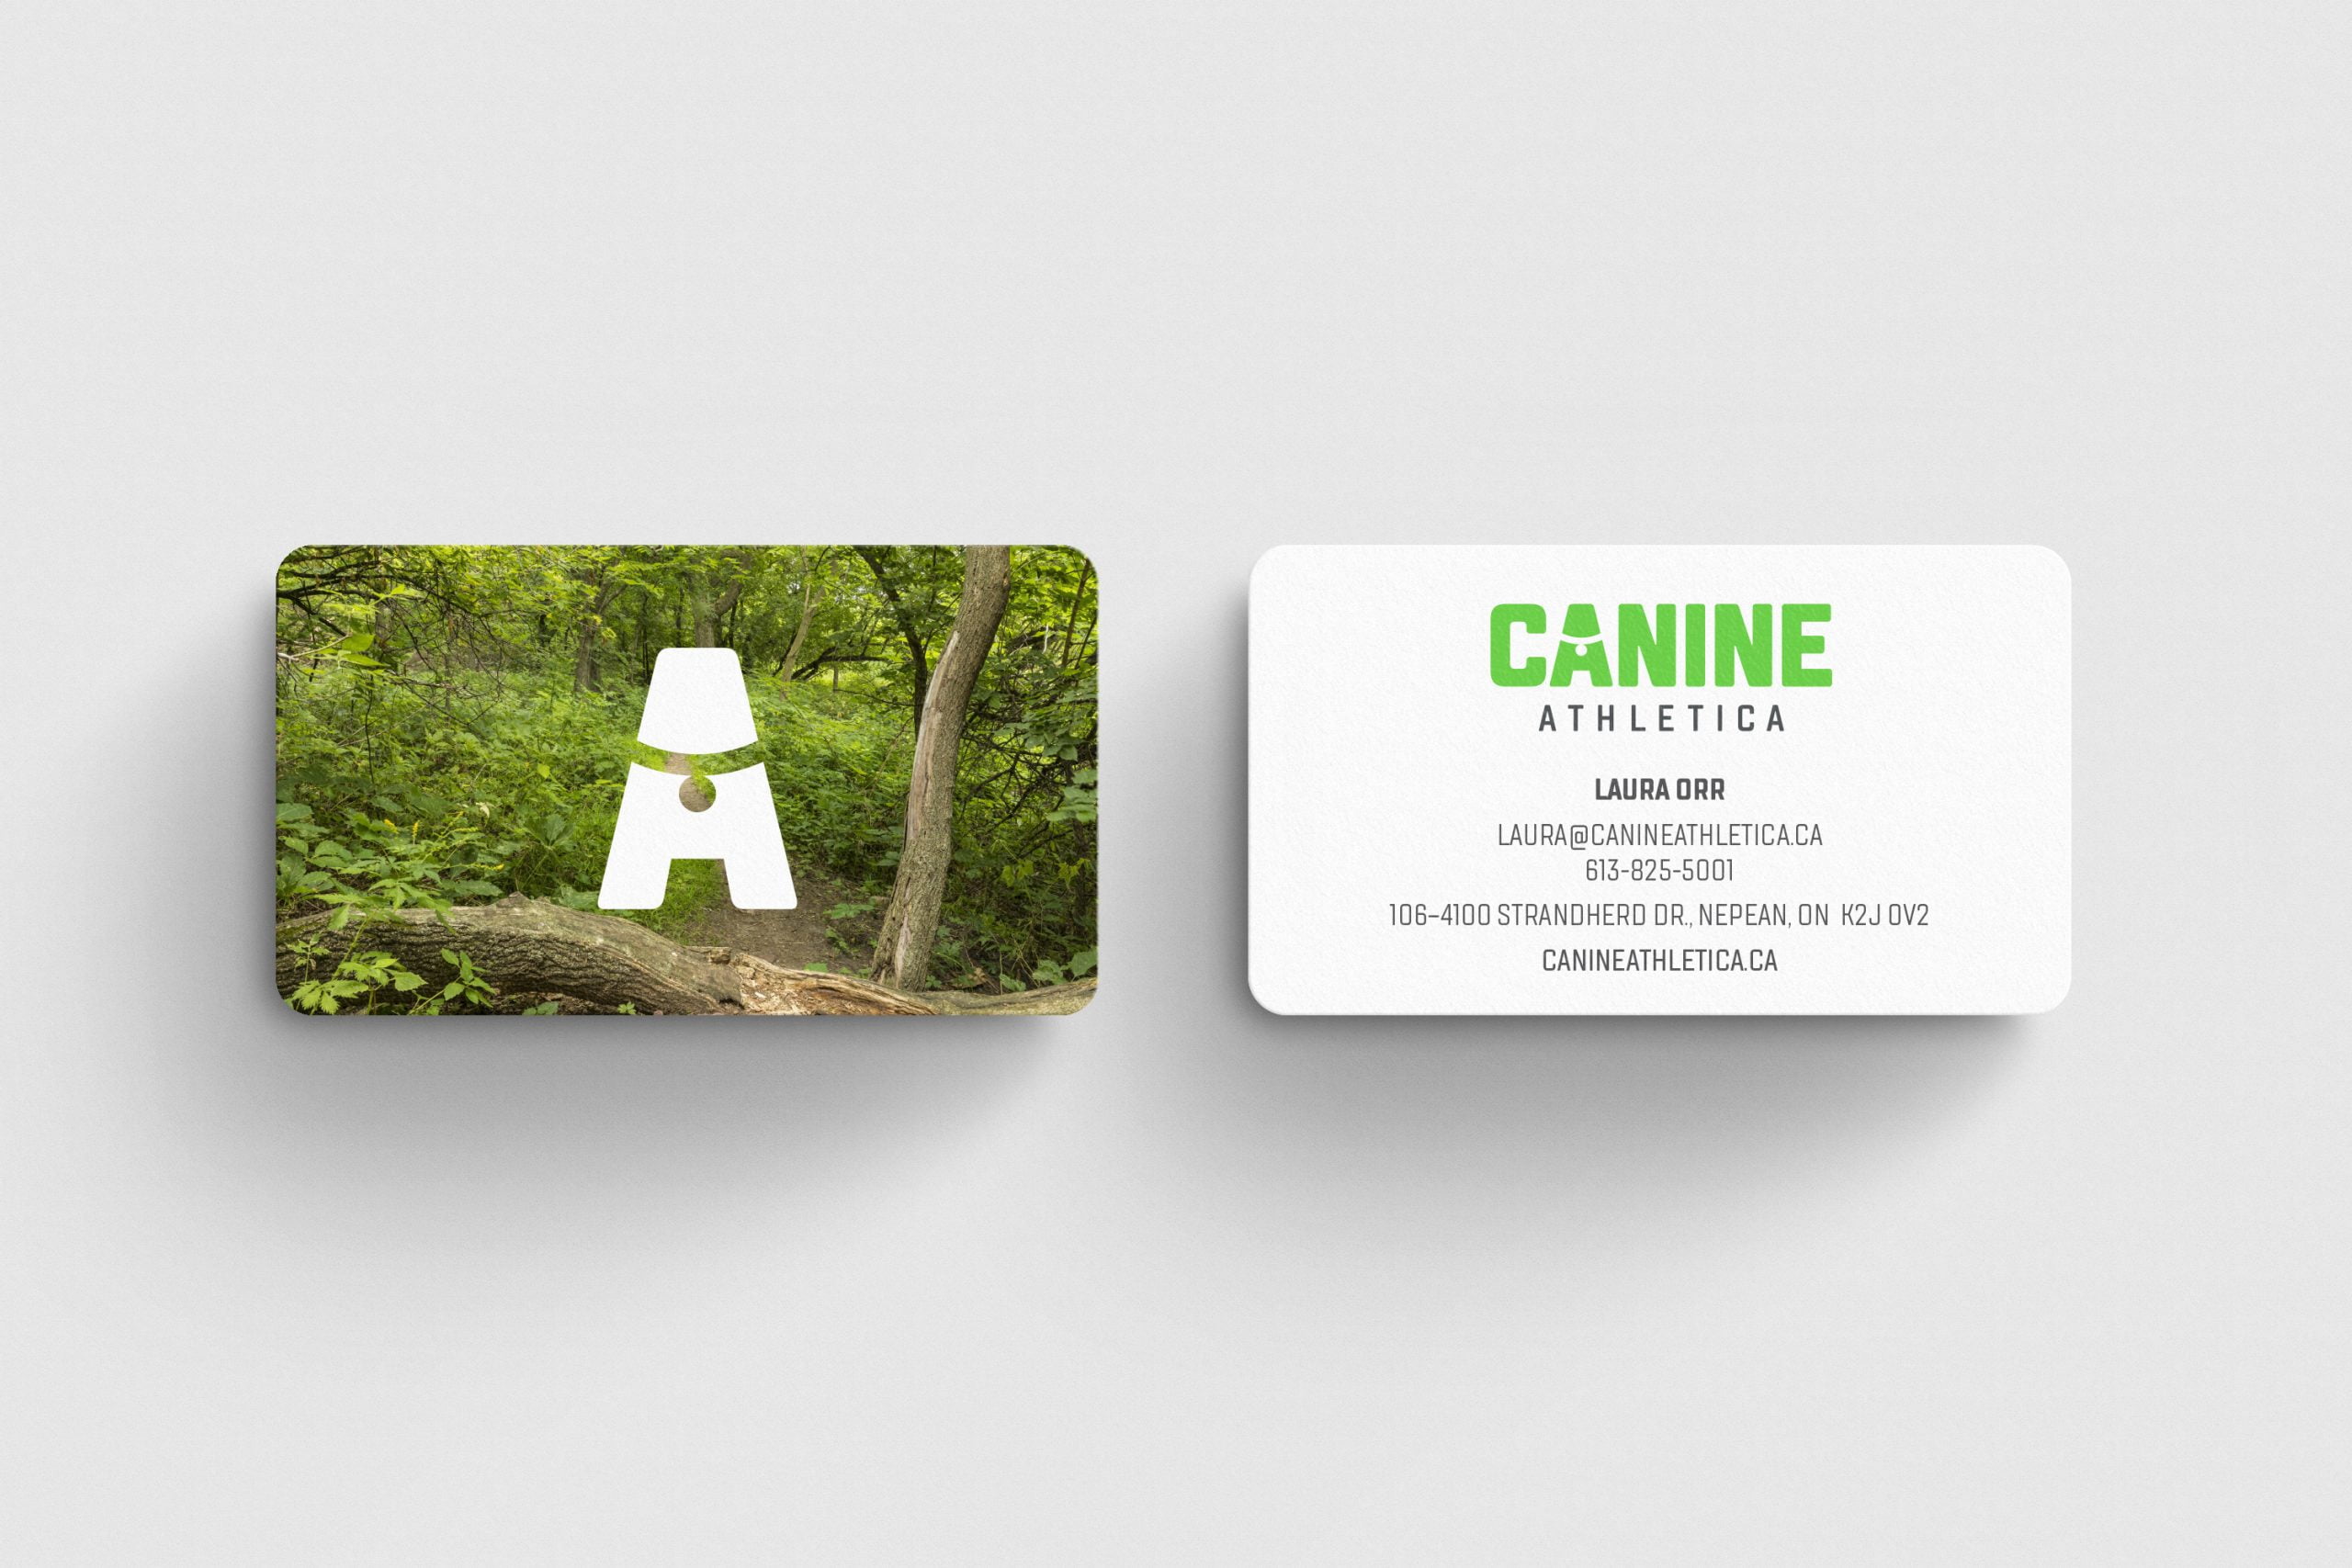 Canine Athletica business cards by Ottawa graphic designer idApostle